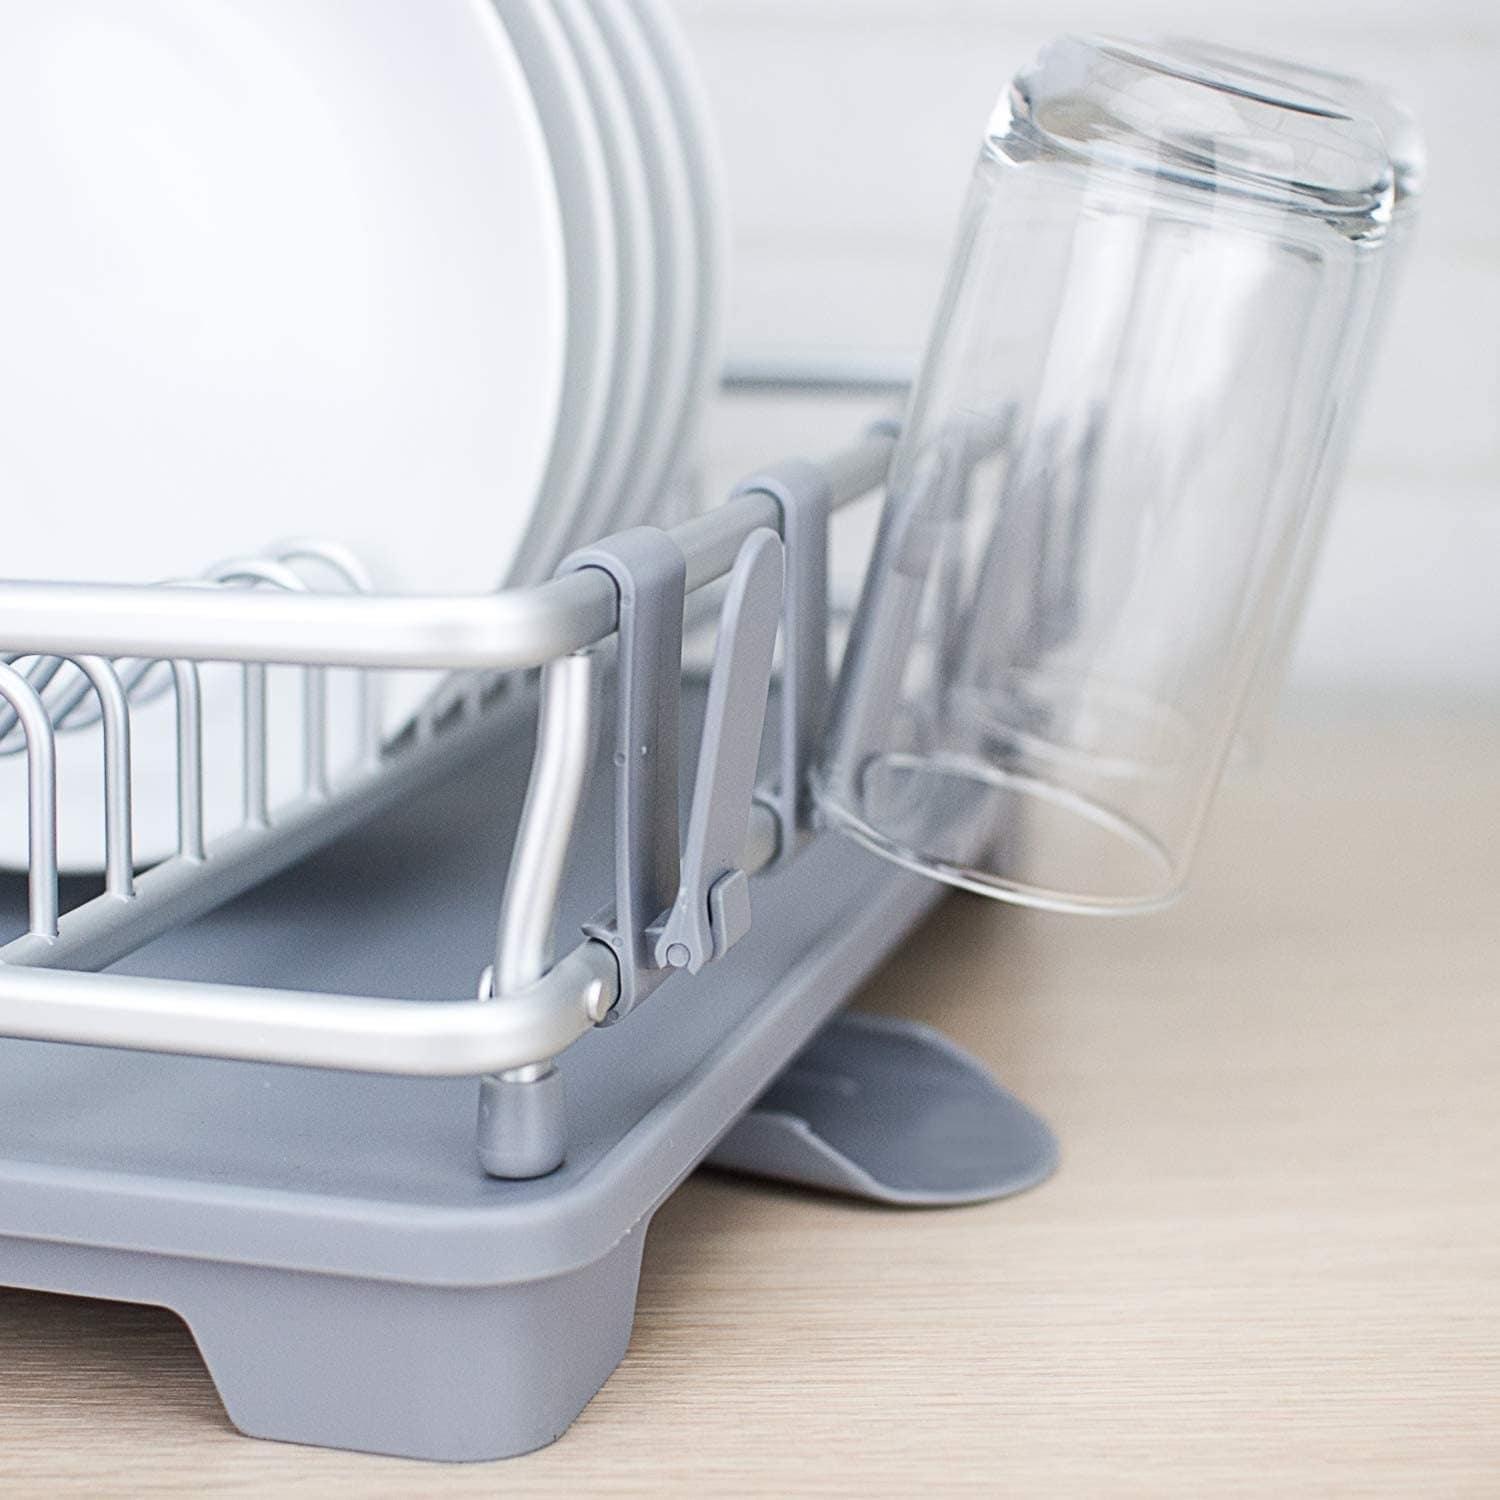 HK Dish Drying Rack Dish Drainer w/Utensil Holder Antimicrobial  Multi-function Foldable - M - Bed Bath & Beyond - 30565839